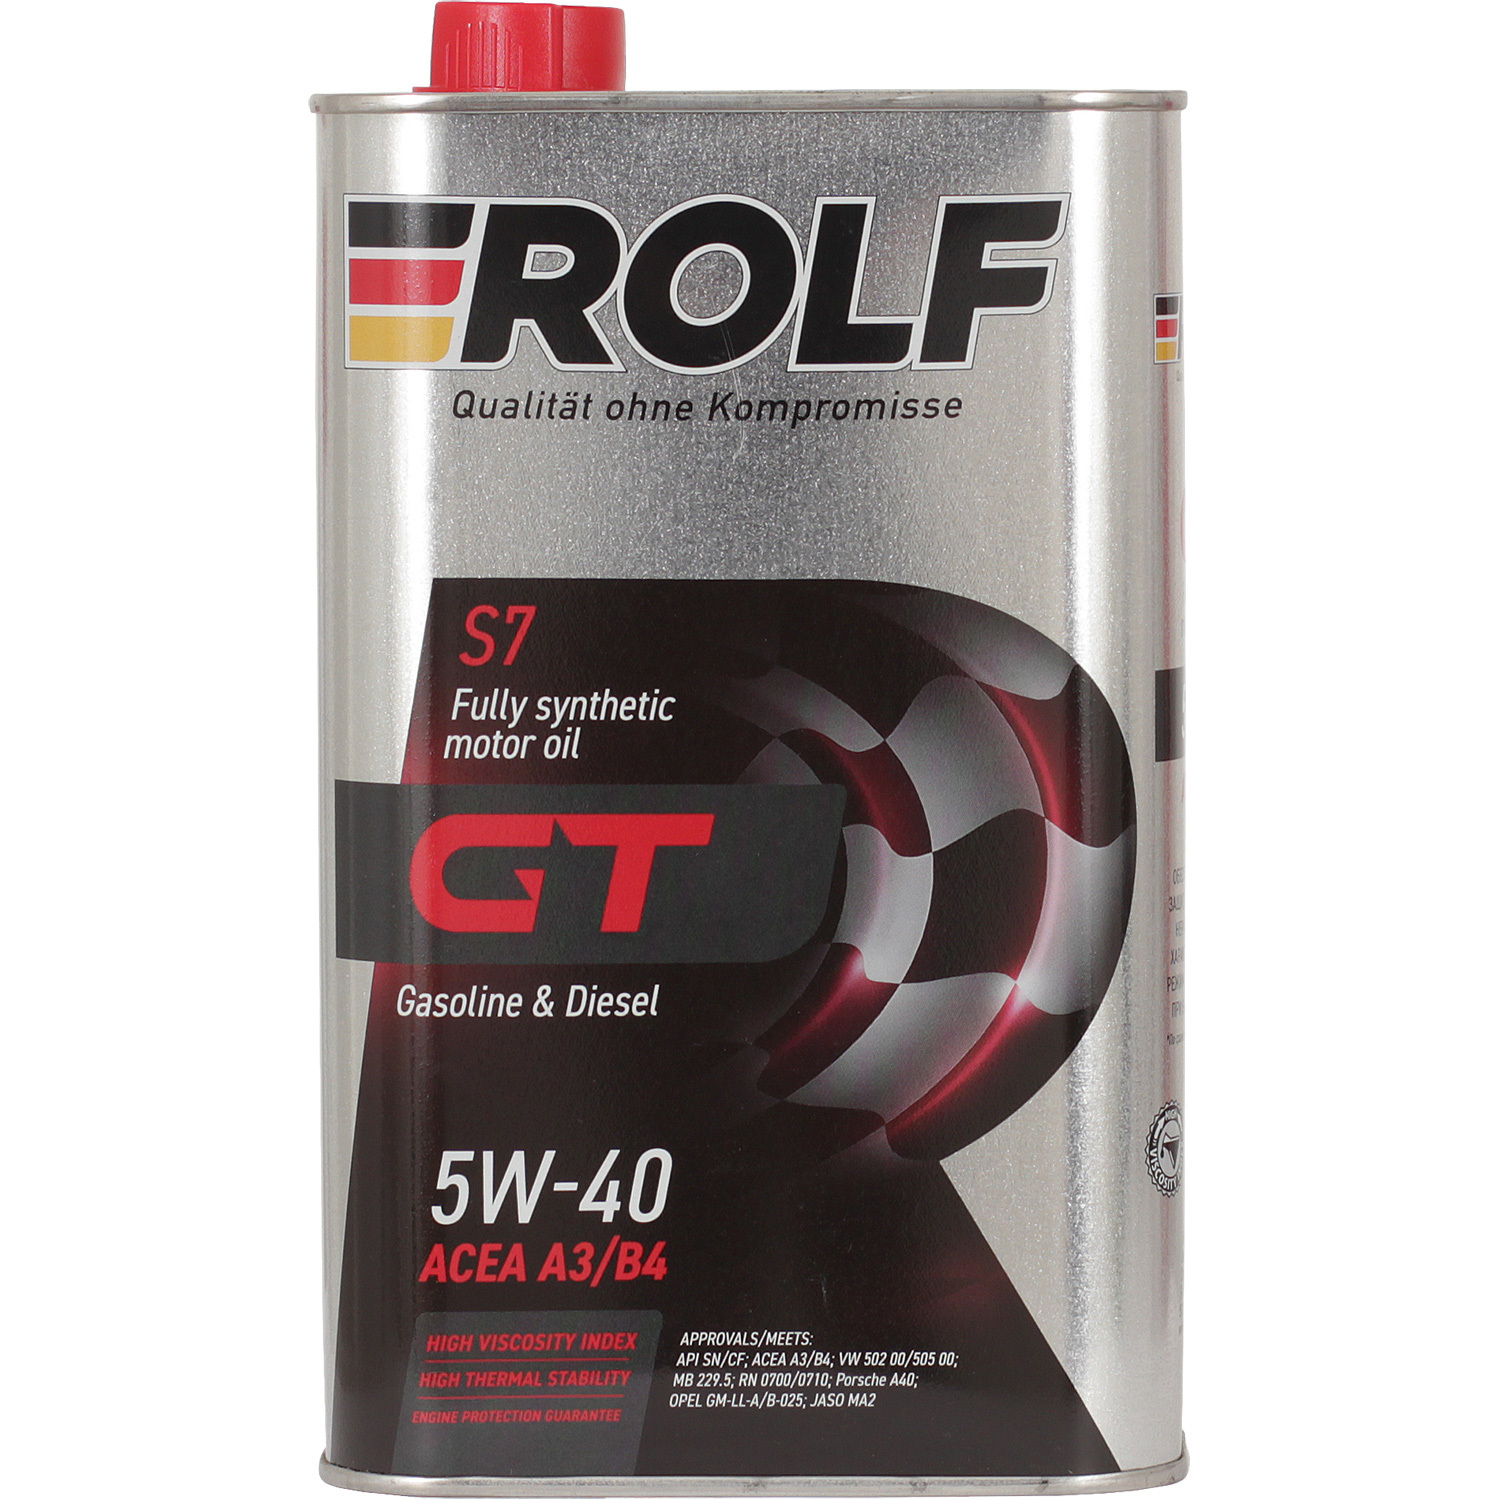 Rolf Моторное масло Rolf GT 5W-40, 1 л масло моторное rolf gt 5w40 синтетическое 1 л